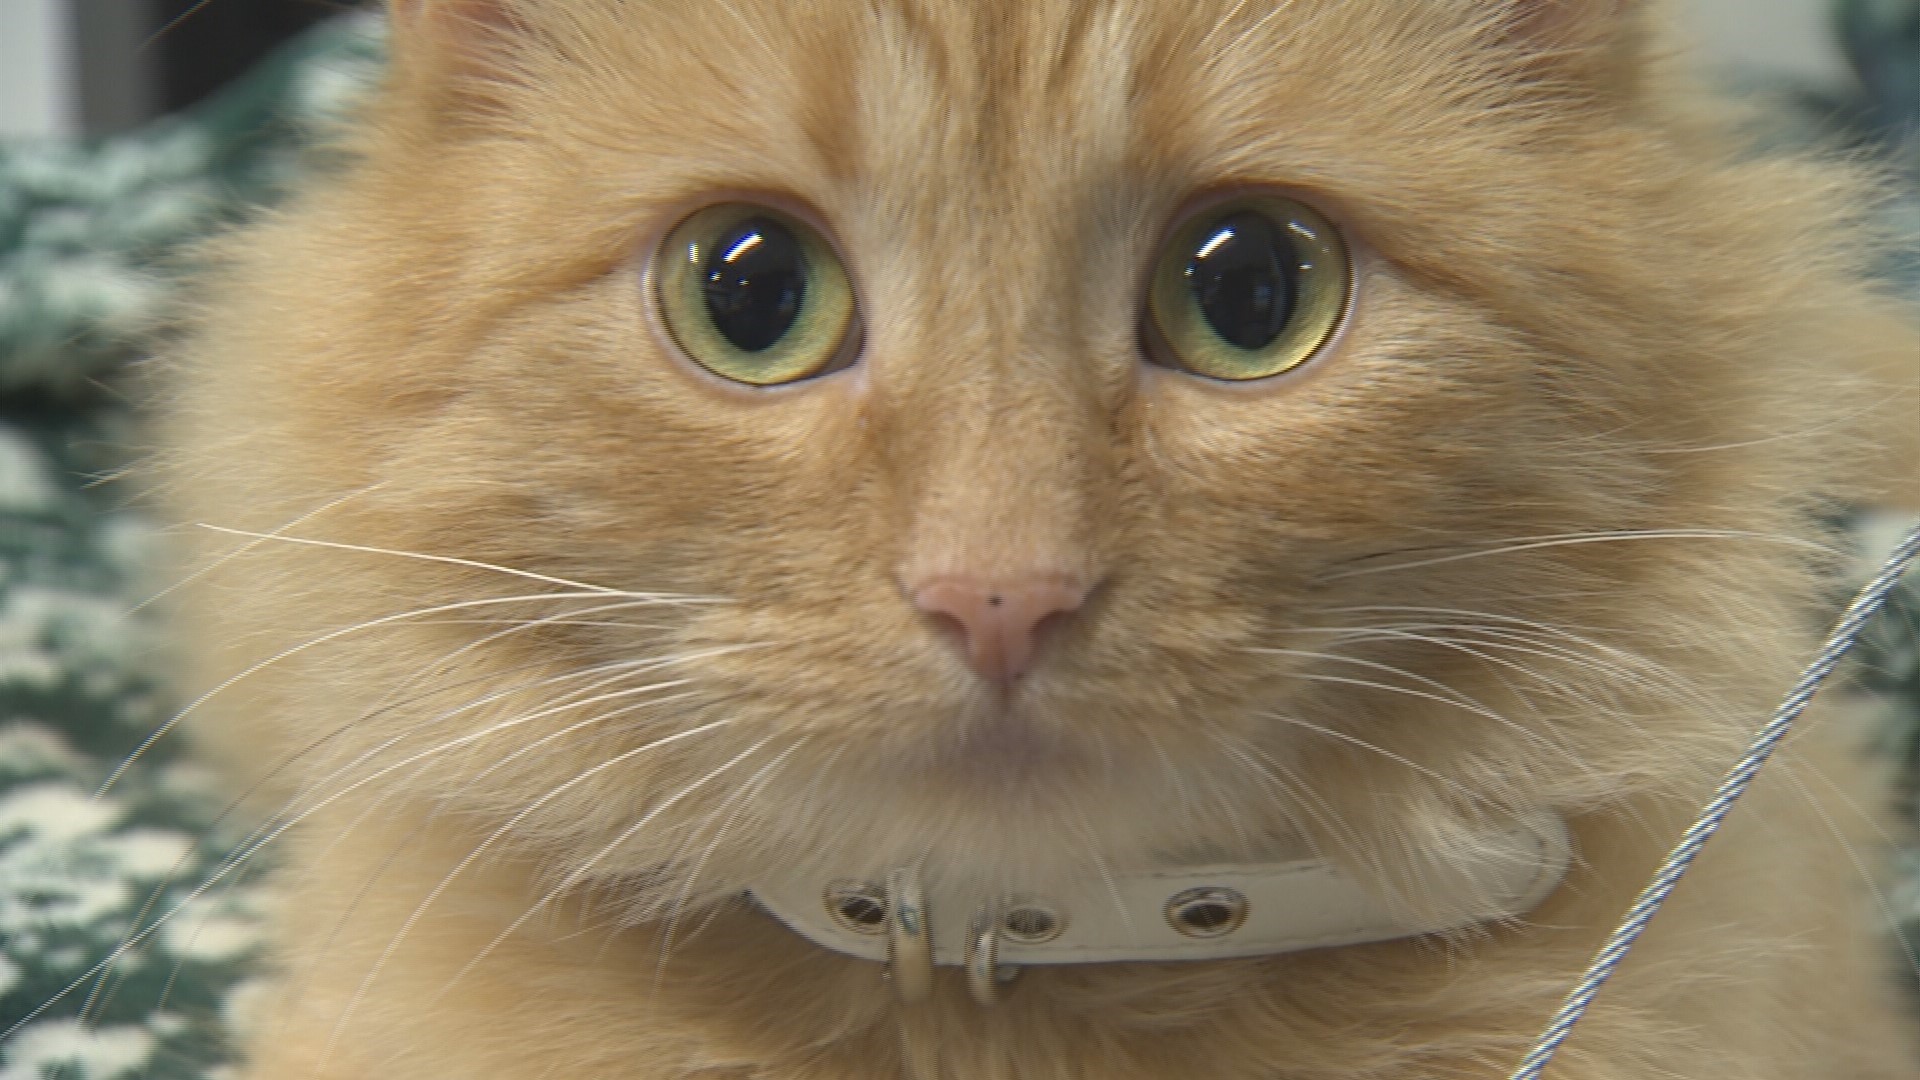 Catffeinated is adopting cats at a rate of one a day since opening